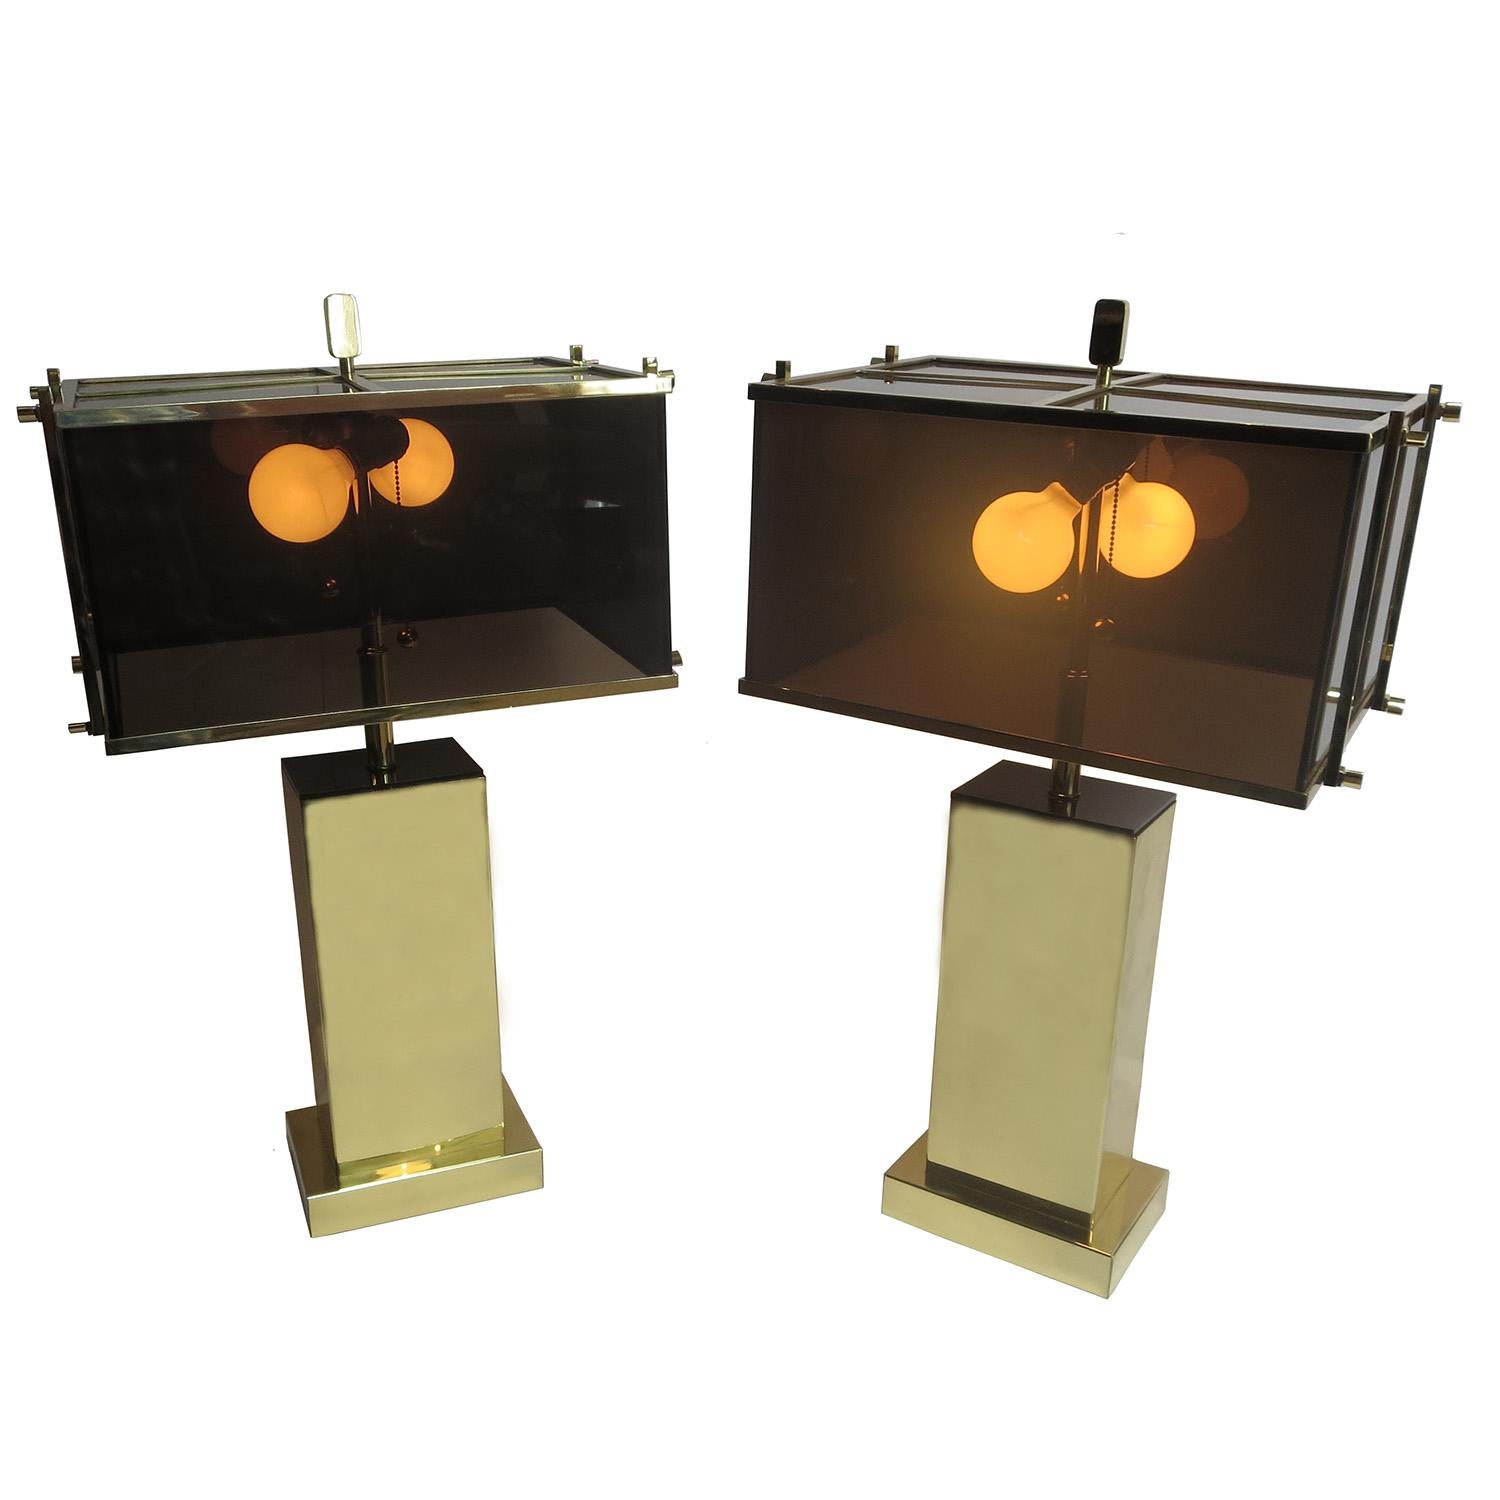 These stylish “Edison” table lamps were designed by Charles Hollis Jones in 1971. They were offered in chrome with clear acrylic shades, or in brass with the smoked acrylic shades, as shown here. The lamps are in excellent original condition, and